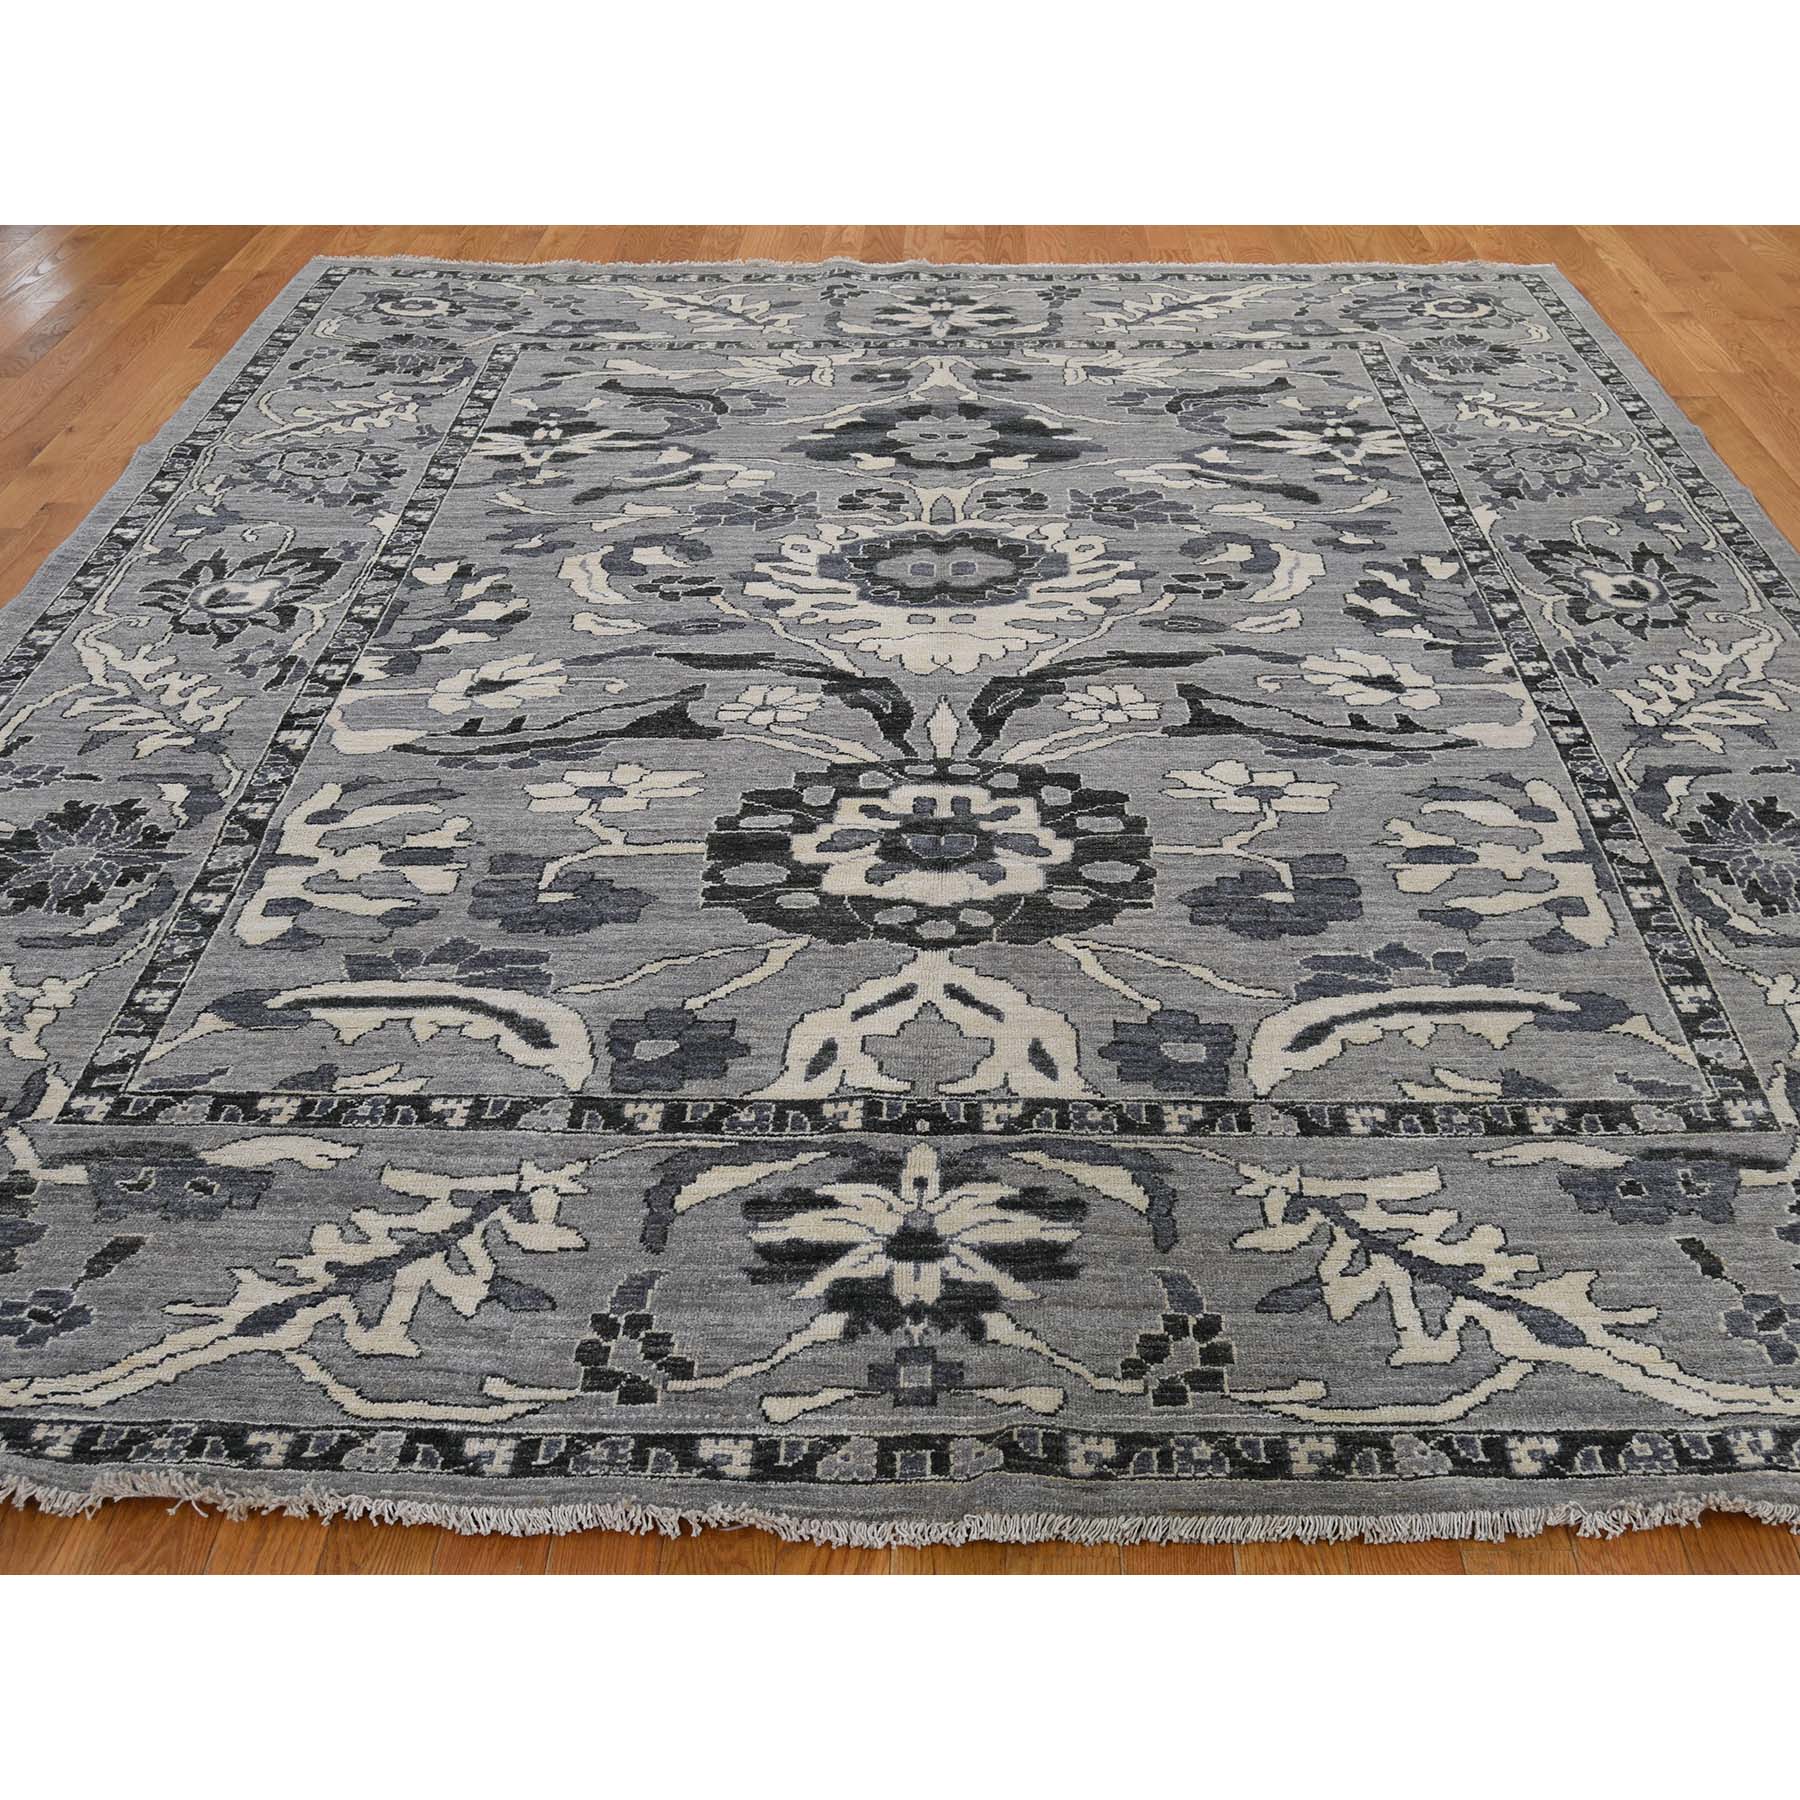 8-2 x9-10  Mahal Design Undyed Natural Wool Hand-Knotted Oriental Rug 